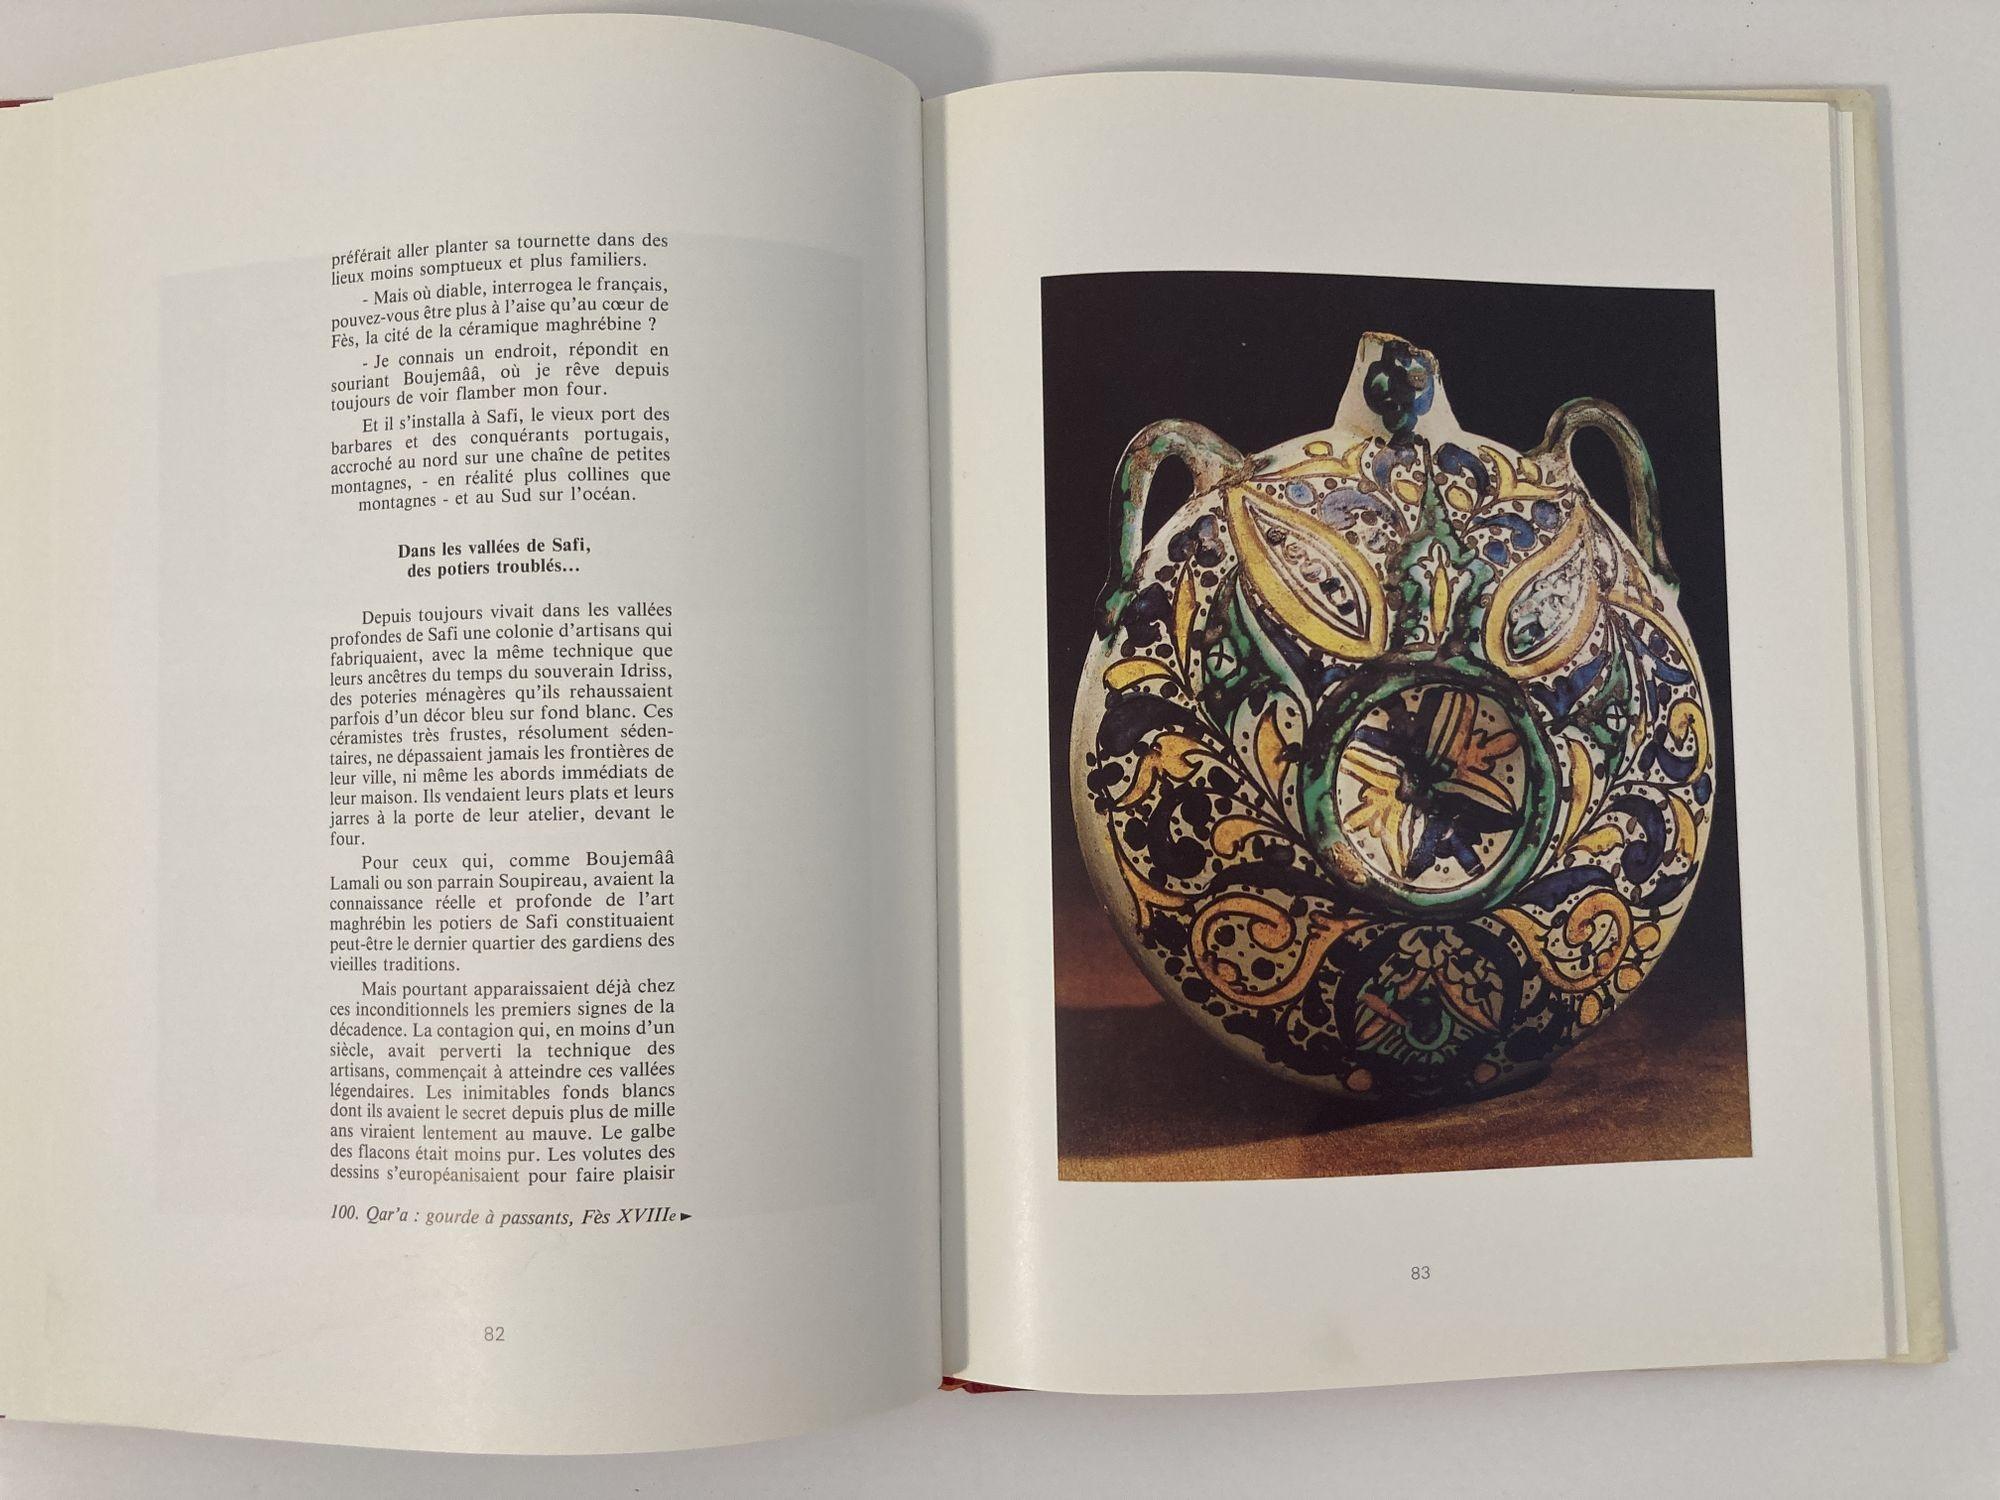 Moroccan Pottery La Poterie Marocaine by André Boukobza French Edition Hard For Sale 7